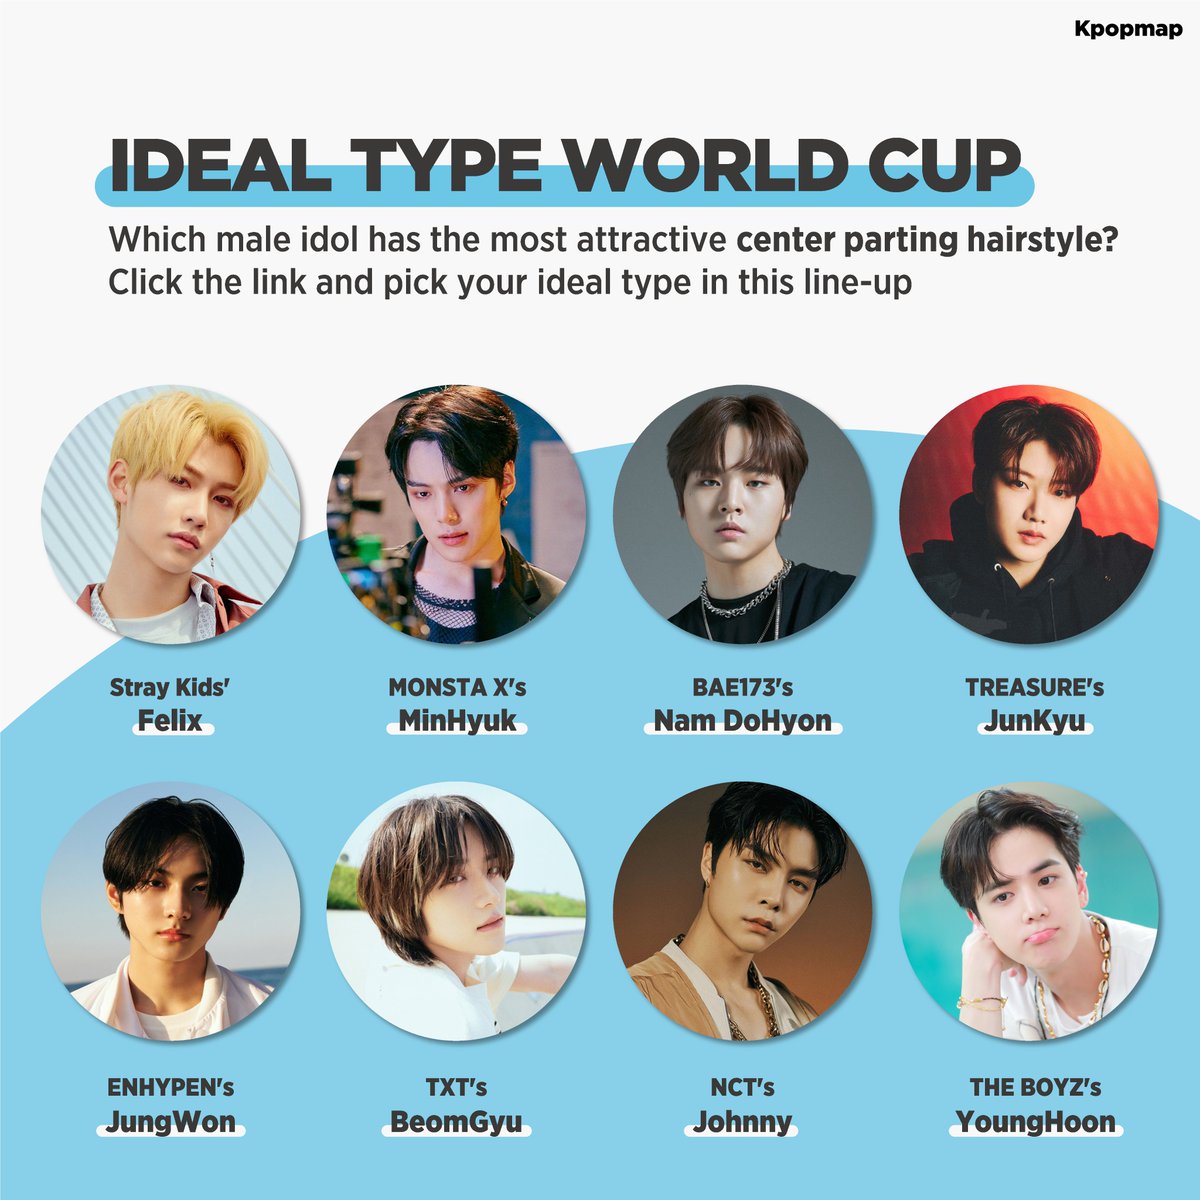 Kpopmap у Твіттері: «✨Kpopmap IDEAL TYPE WORLD CUP✨ Which Male Idol Has The Most  Attractive Center Parting Hairstyle? 🔗 /kSOkytLPyT #StrayKids  #Felix #MONSTAX #MinHyuk #BAE173 #NamDoHyon #TREASURE #JunKyu #ENHYPEN  #JungWon #TXT #BeomGyu #